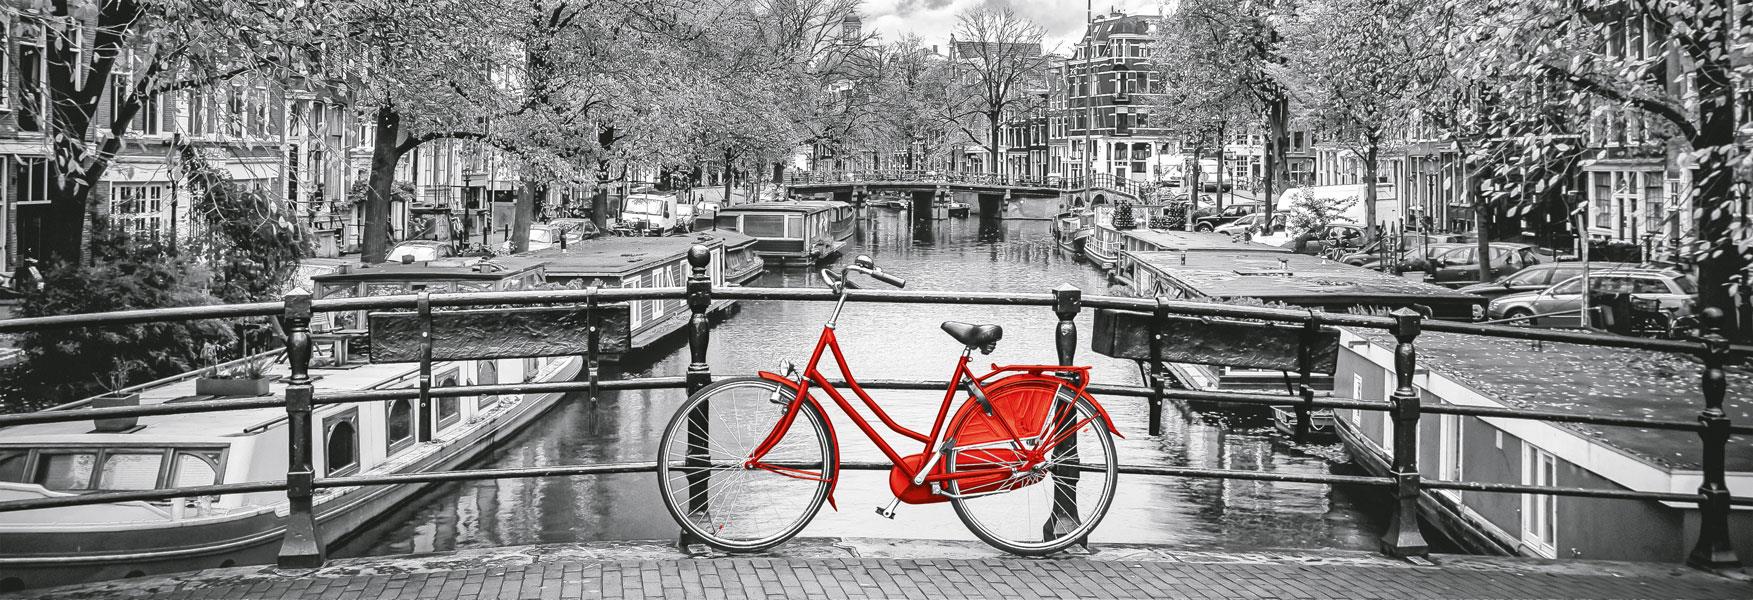 Clementoni Amsterdam Bicycle Panorama High Quality Jigsaw Puzzle (1000 Pieces)